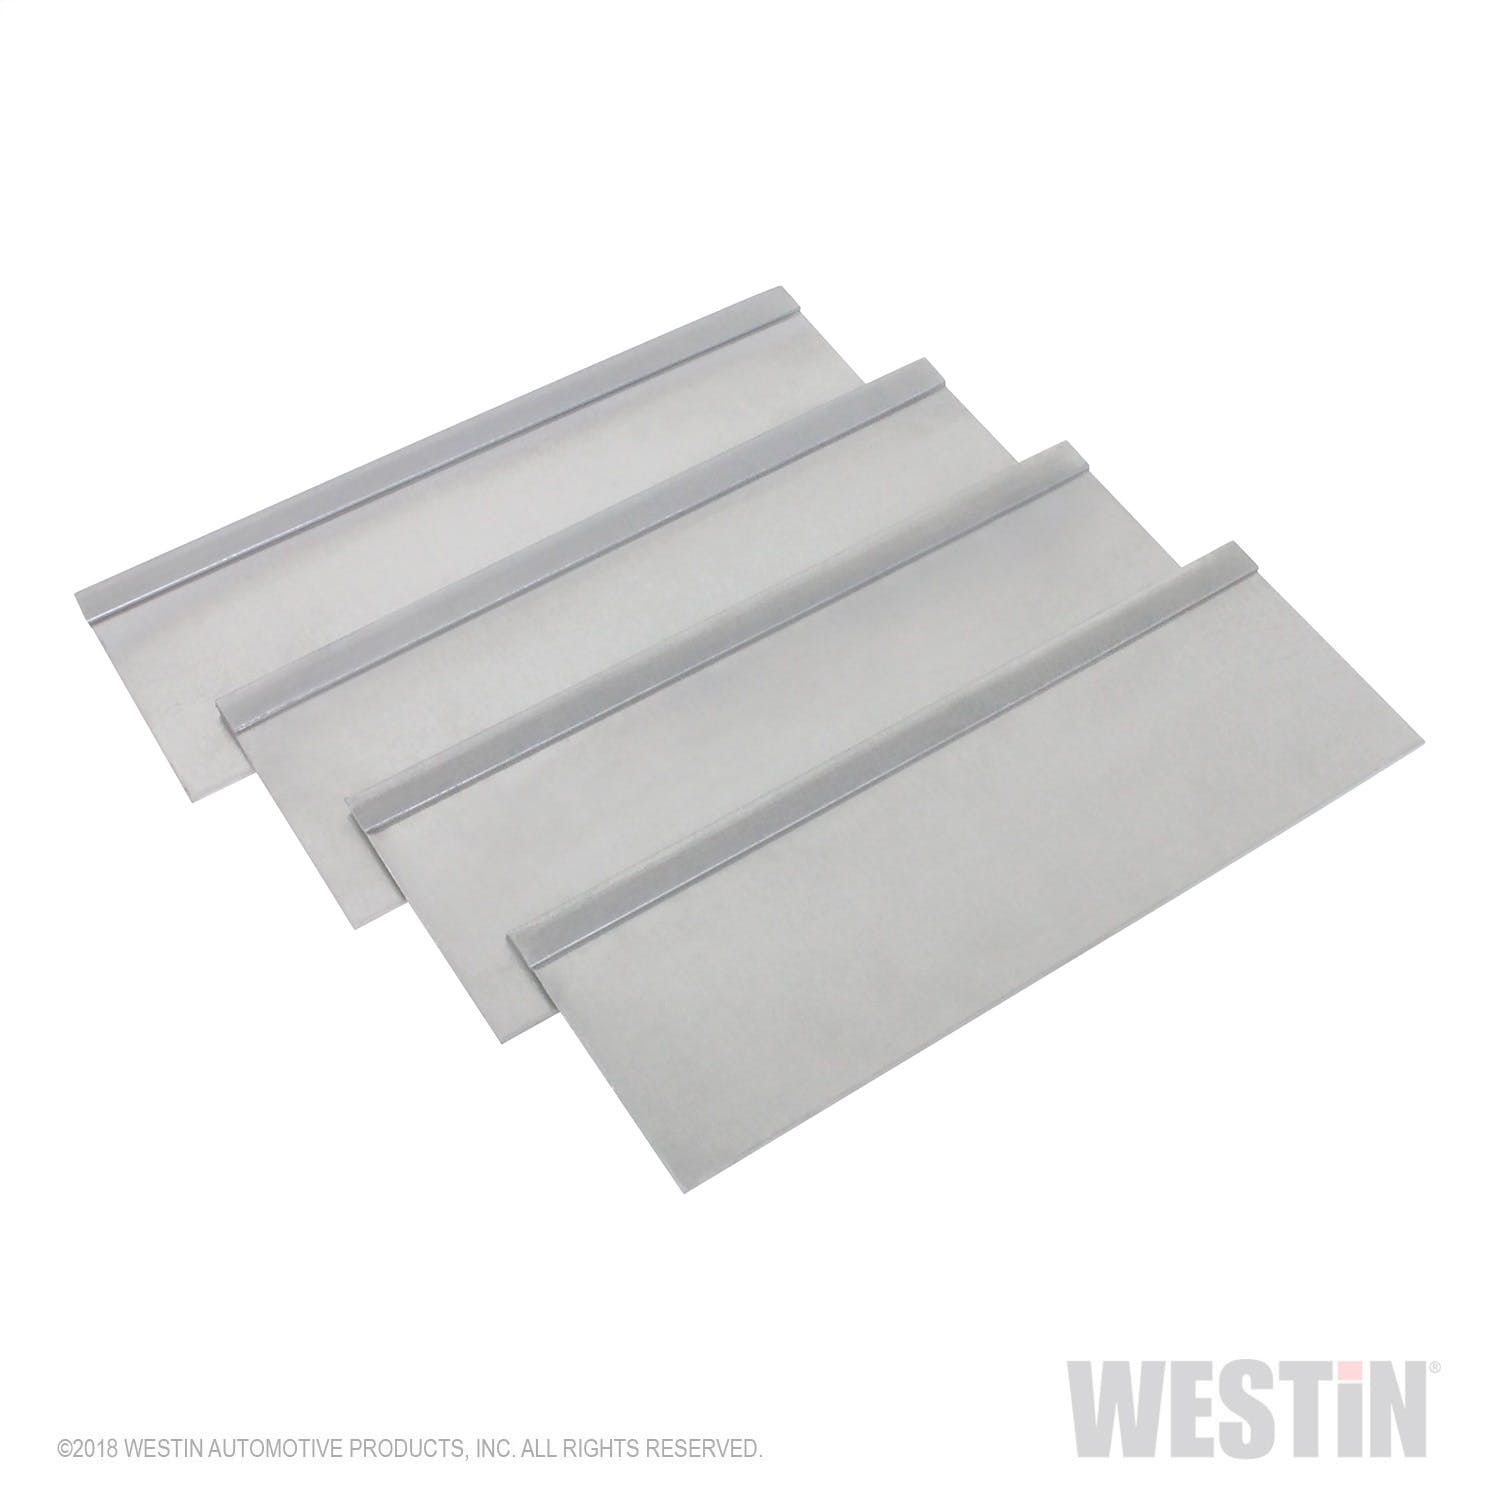 Westin Automotive 80-TR11 9 inch x 15 inch tray with 4 Silver Aluminum Dividers